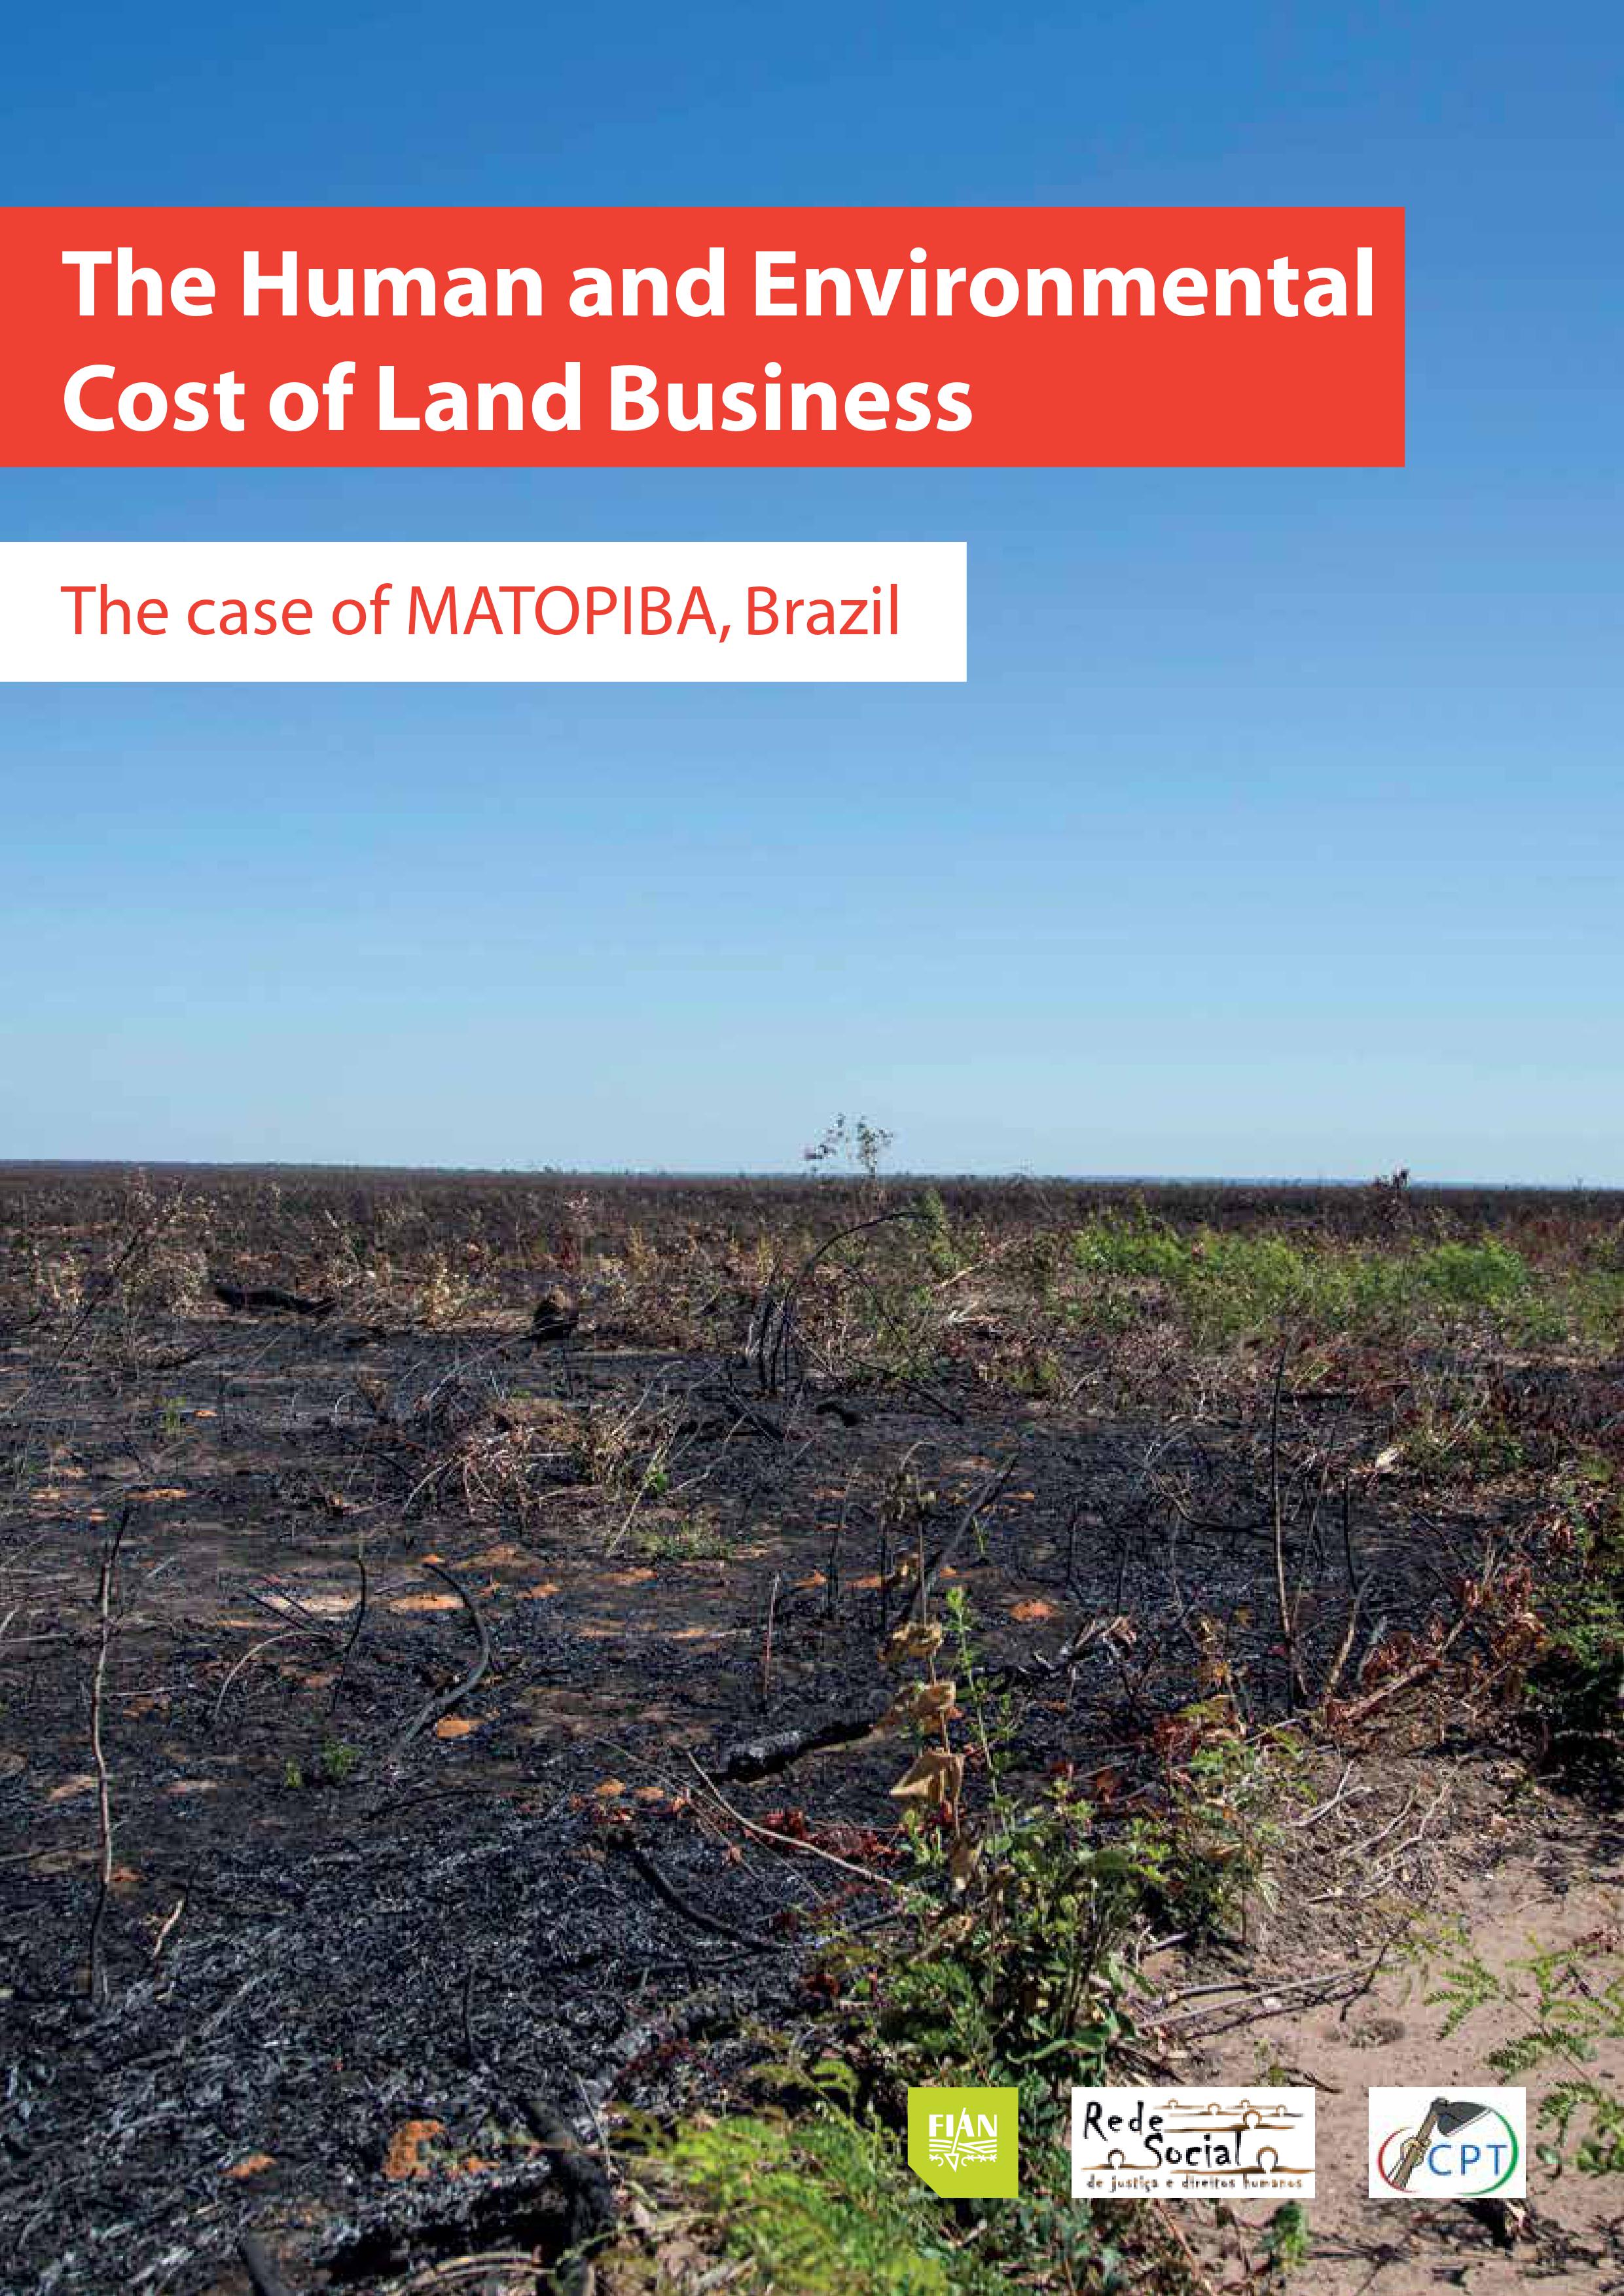 The Human and Environmental Cost of Land Business - The case of MATOPIBA, Brazil